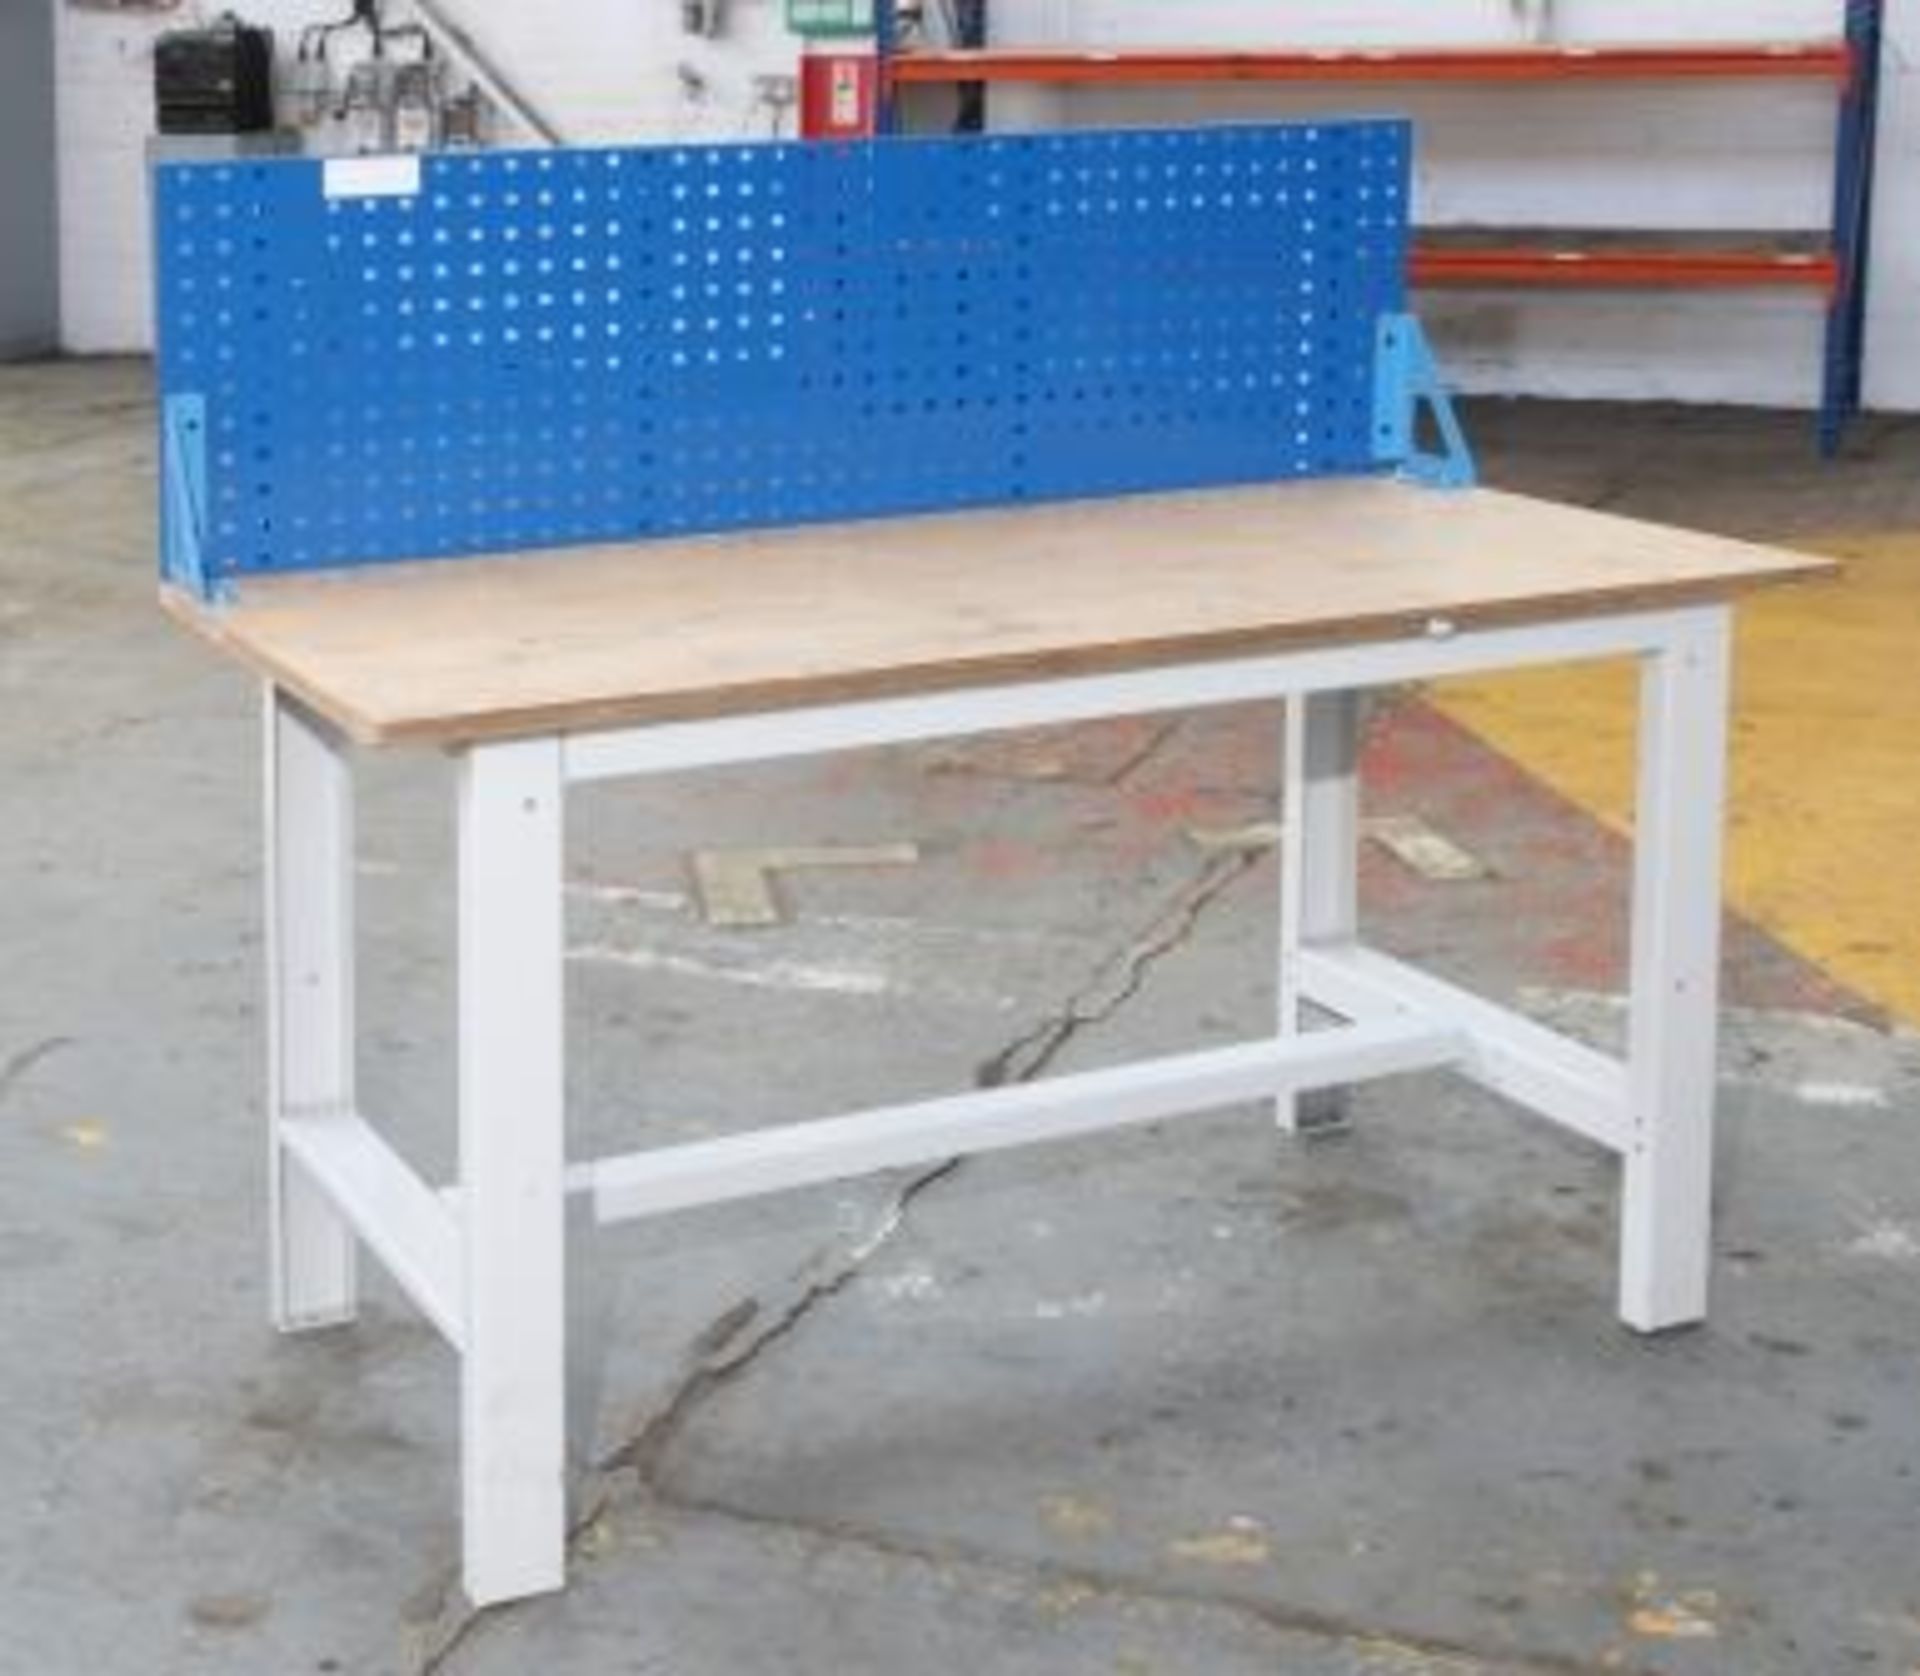 Pair of Work Benches